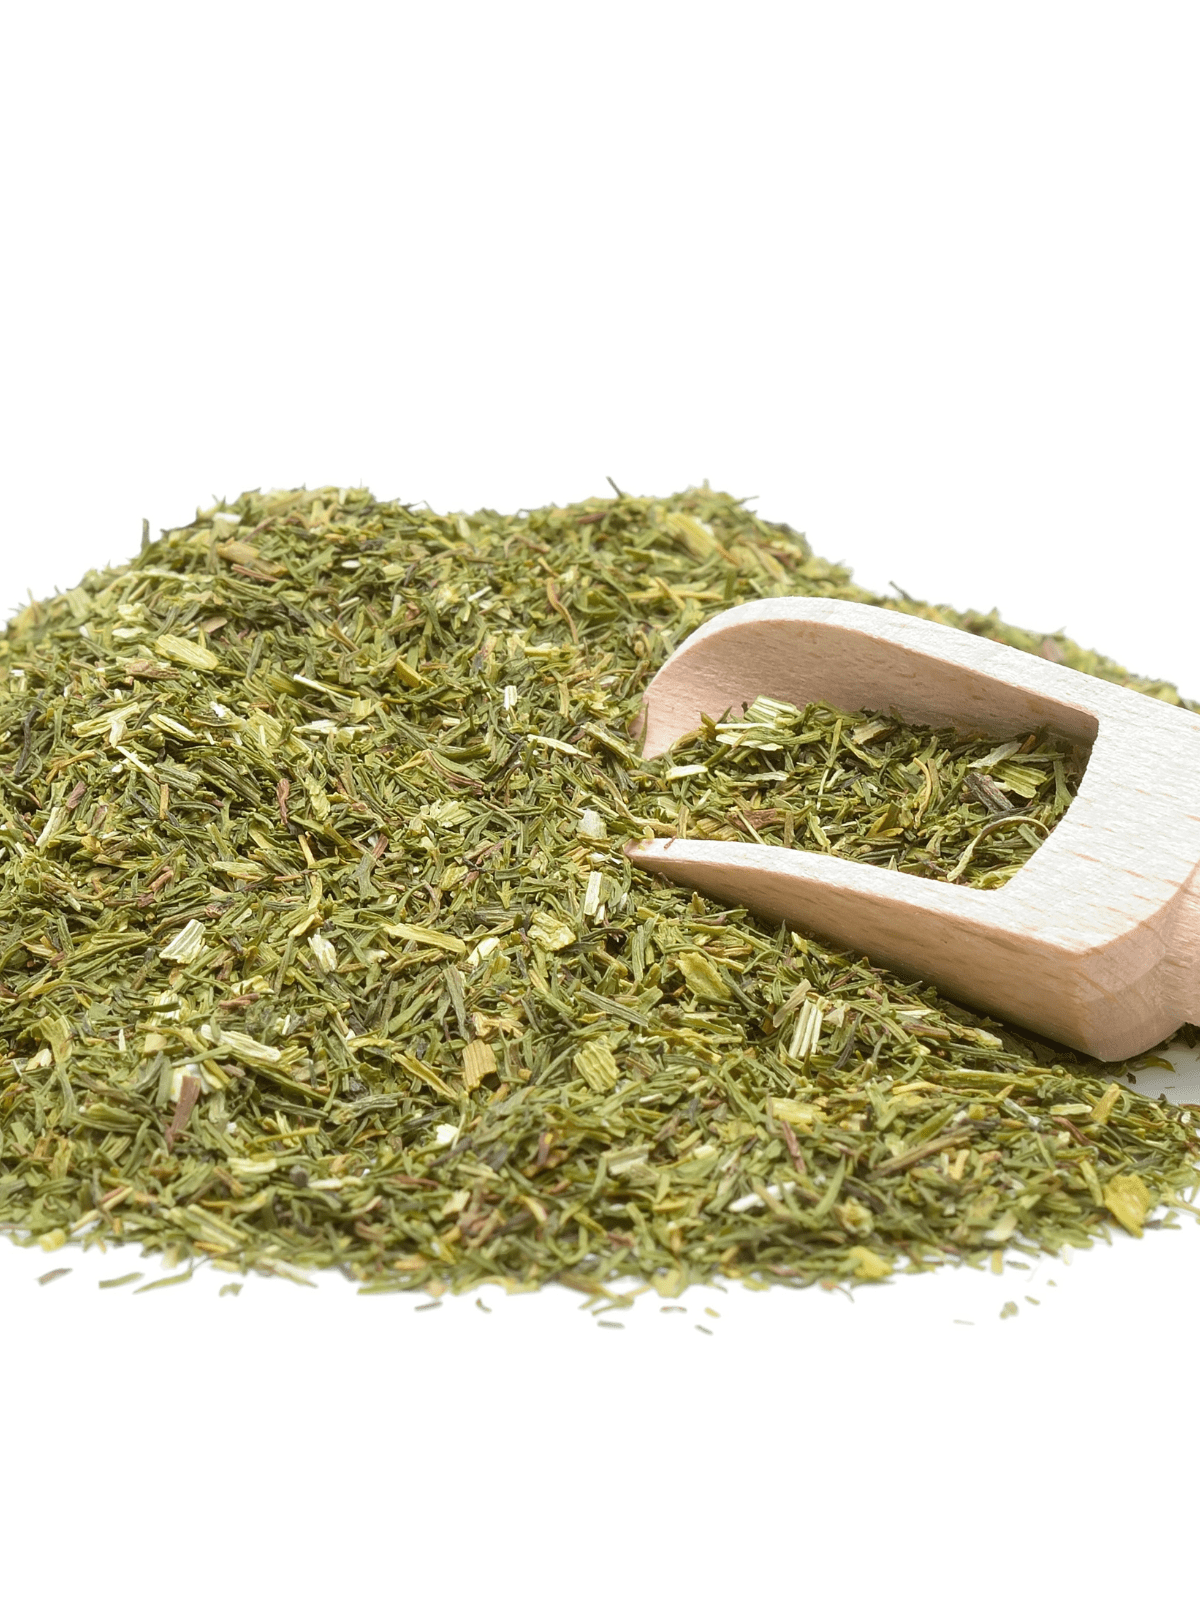 Dried dill with a small scoop